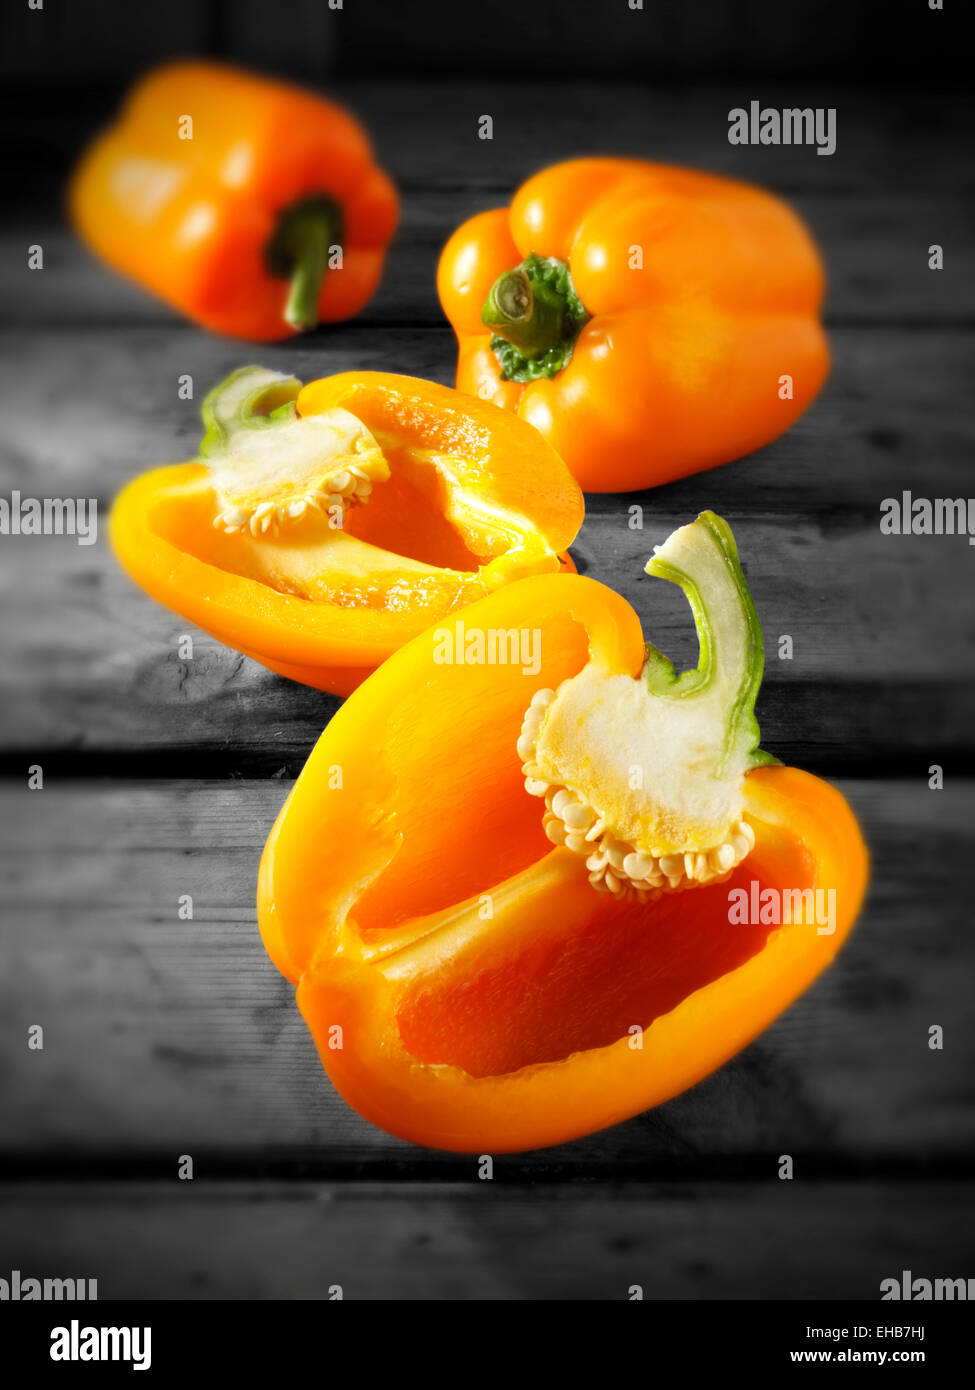 Fresh orange bell peppers, cut and whole Stock Photo